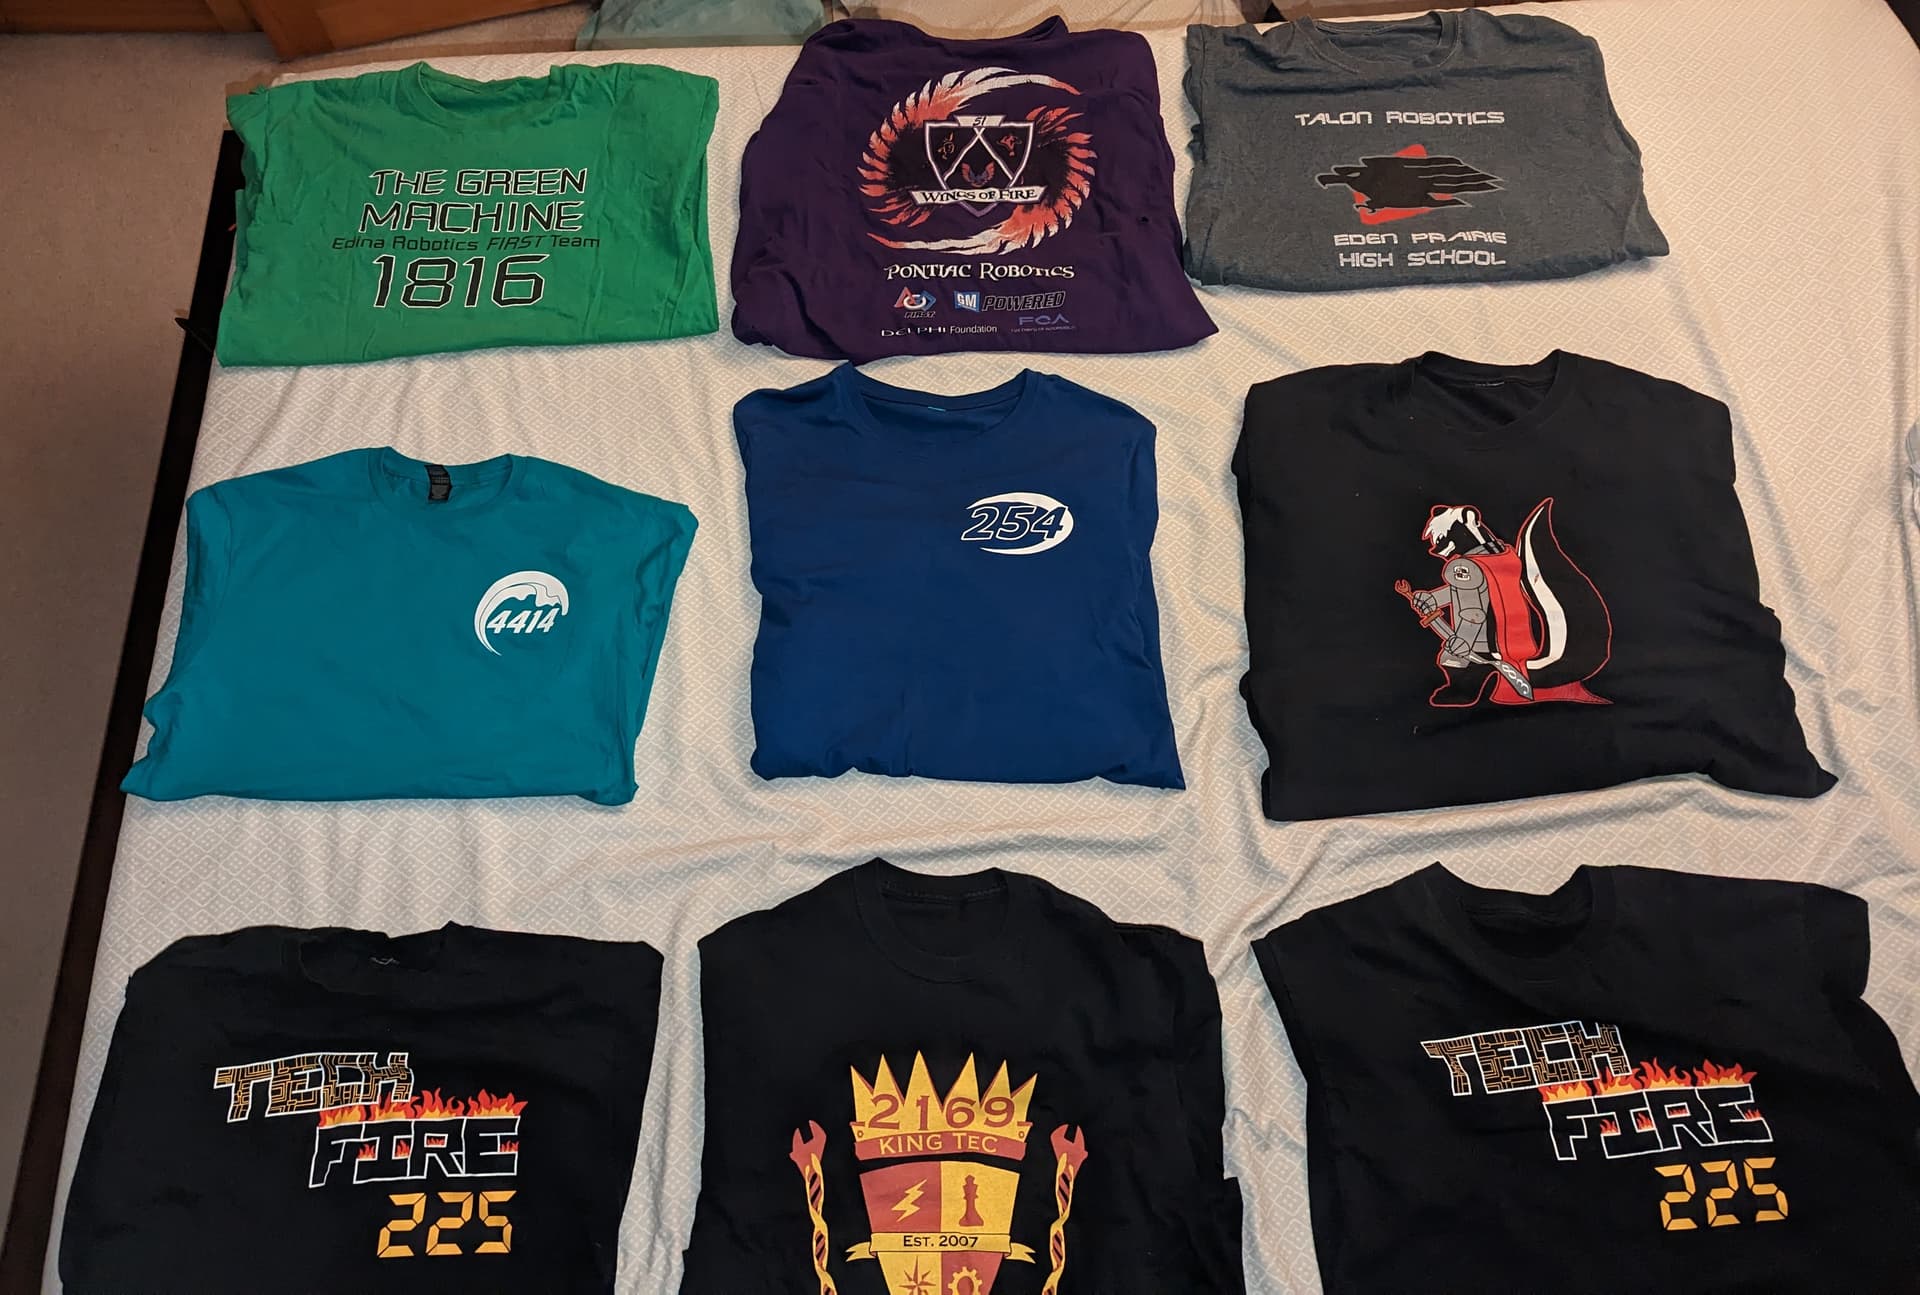 Show us your T-Shirt collection! - General Forum - Chief Delphi